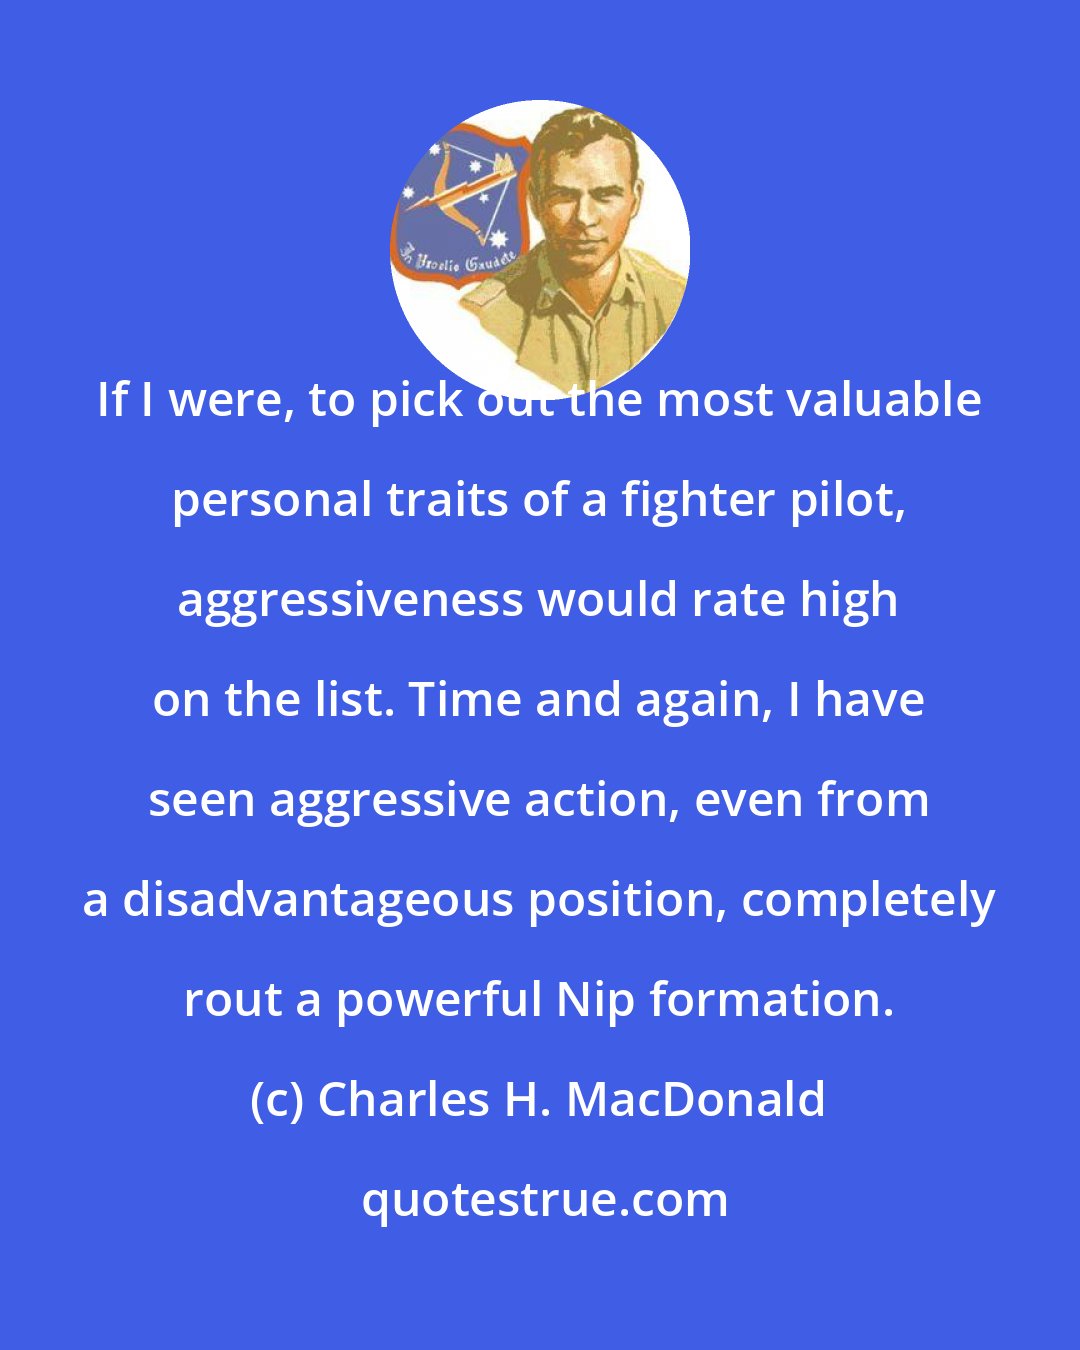 Charles H. MacDonald: If I were, to pick out the most valuable personal traits of a fighter pilot, aggressiveness would rate high on the list. Time and again, I have seen aggressive action, even from a disadvantageous position, completely rout a powerful Nip formation.